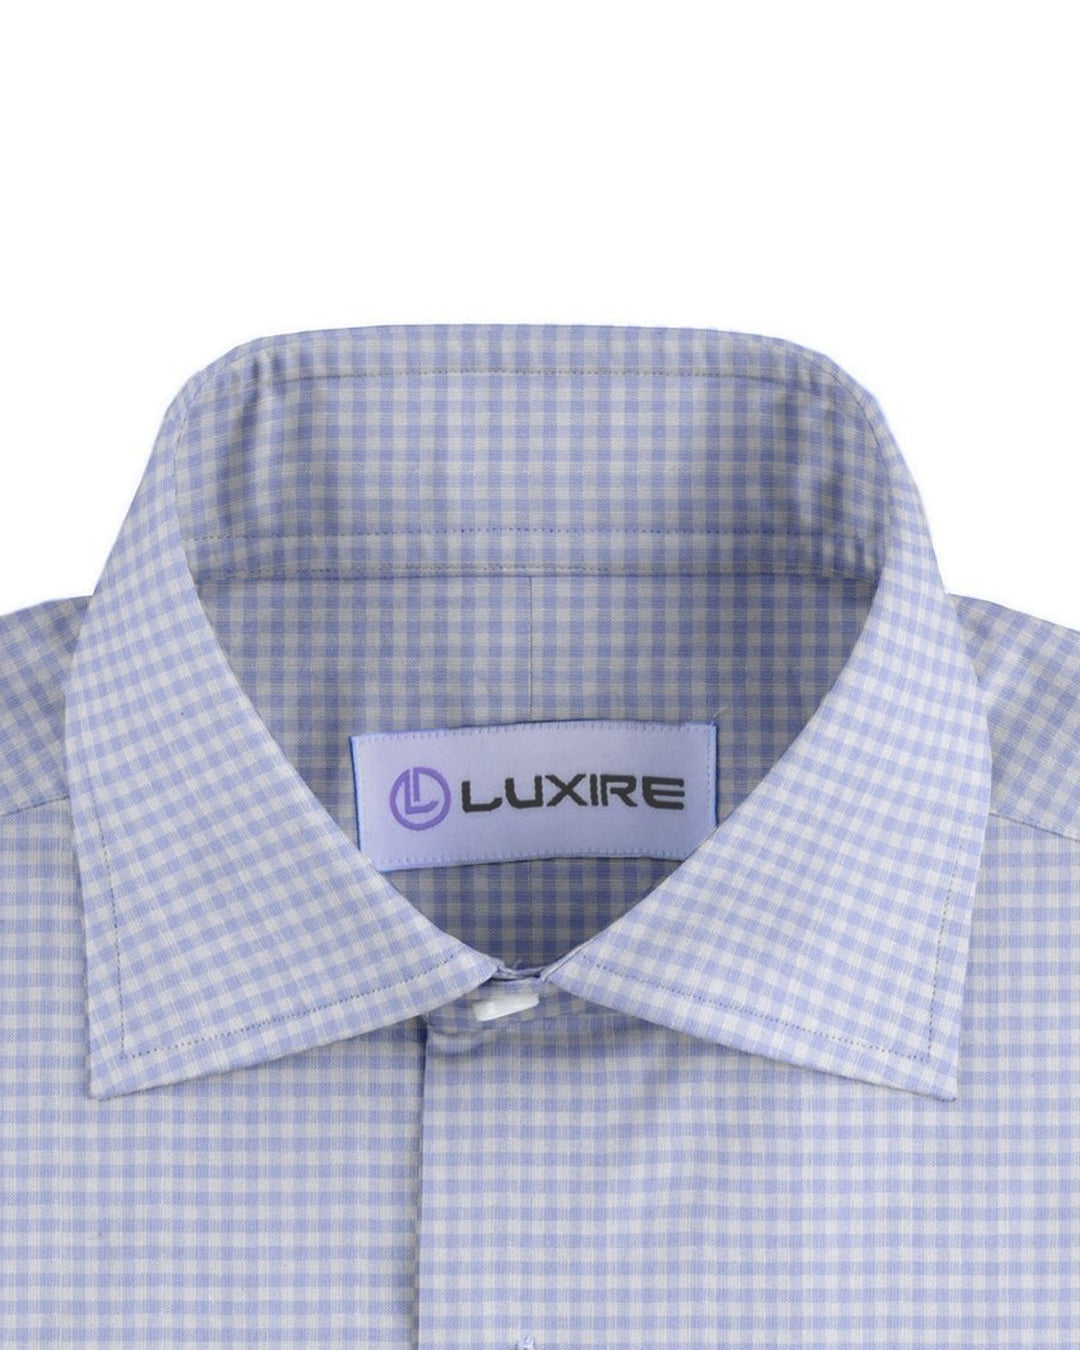 Collar of the custom linen shirt for men in light blue with blue gingham checks by Luxire Clothing